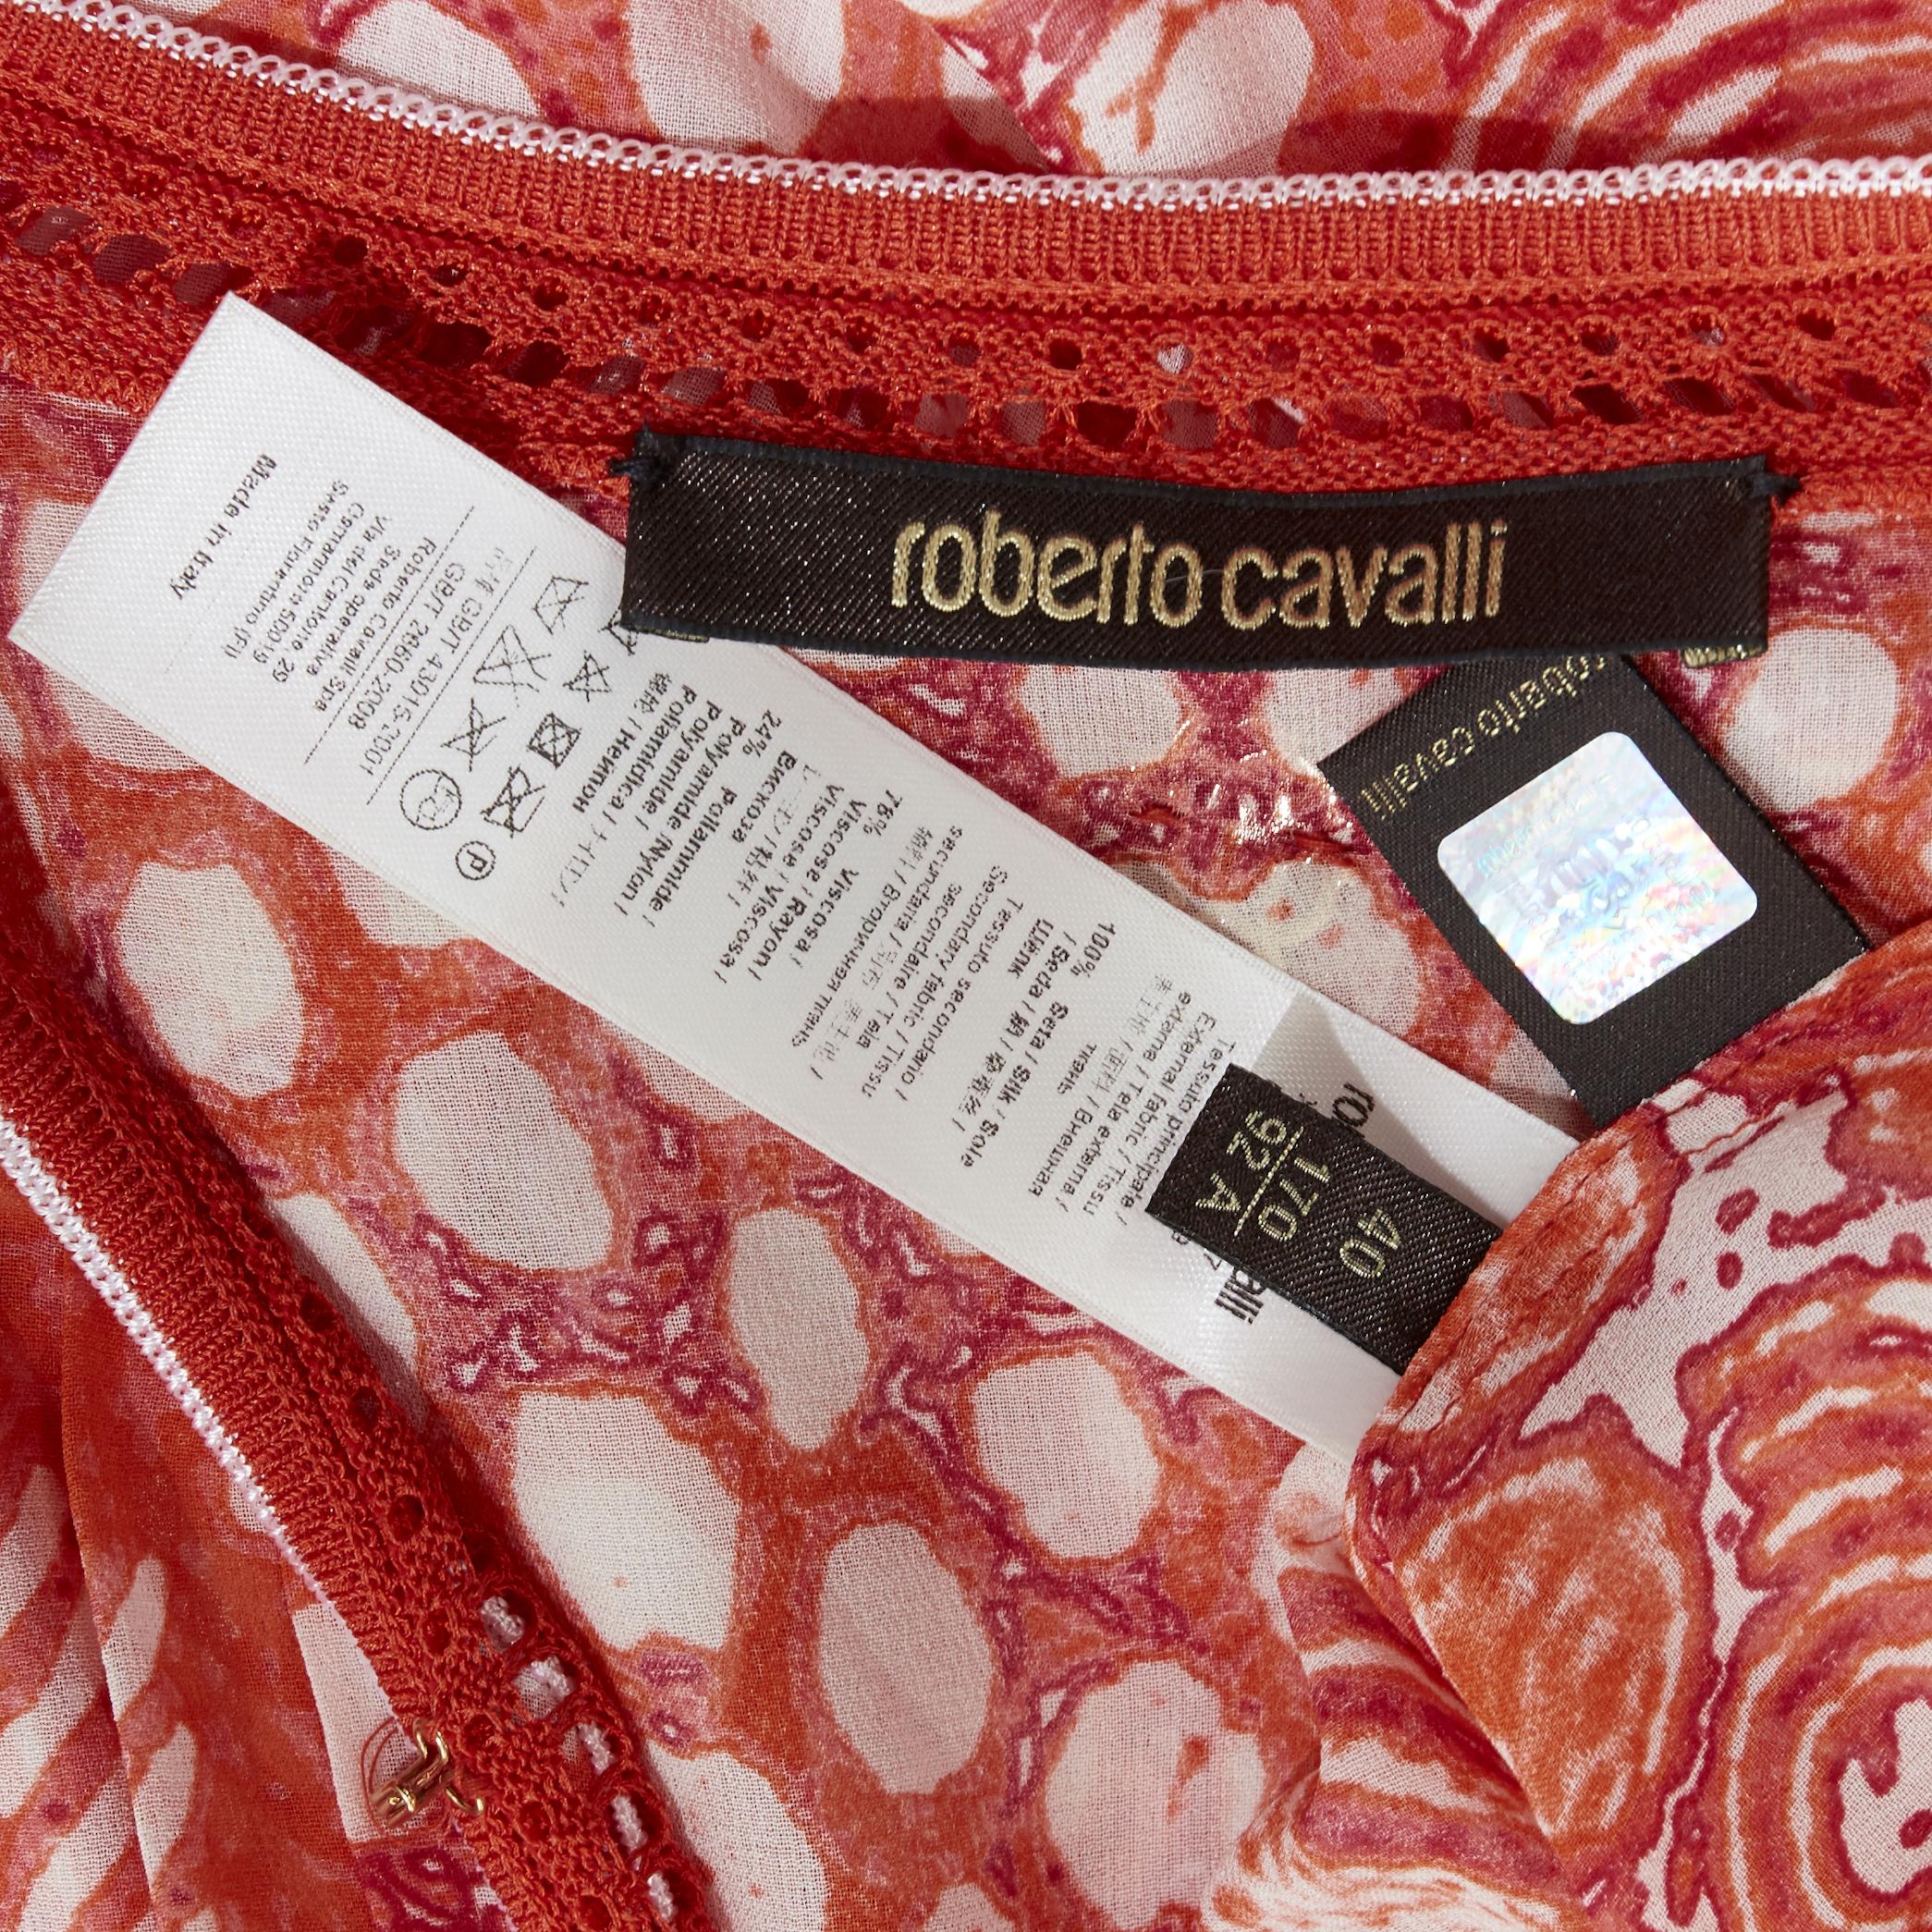 ROBERTO CAVALLI 100% silk red tropical floral crochet seam poncho cover up top S 6